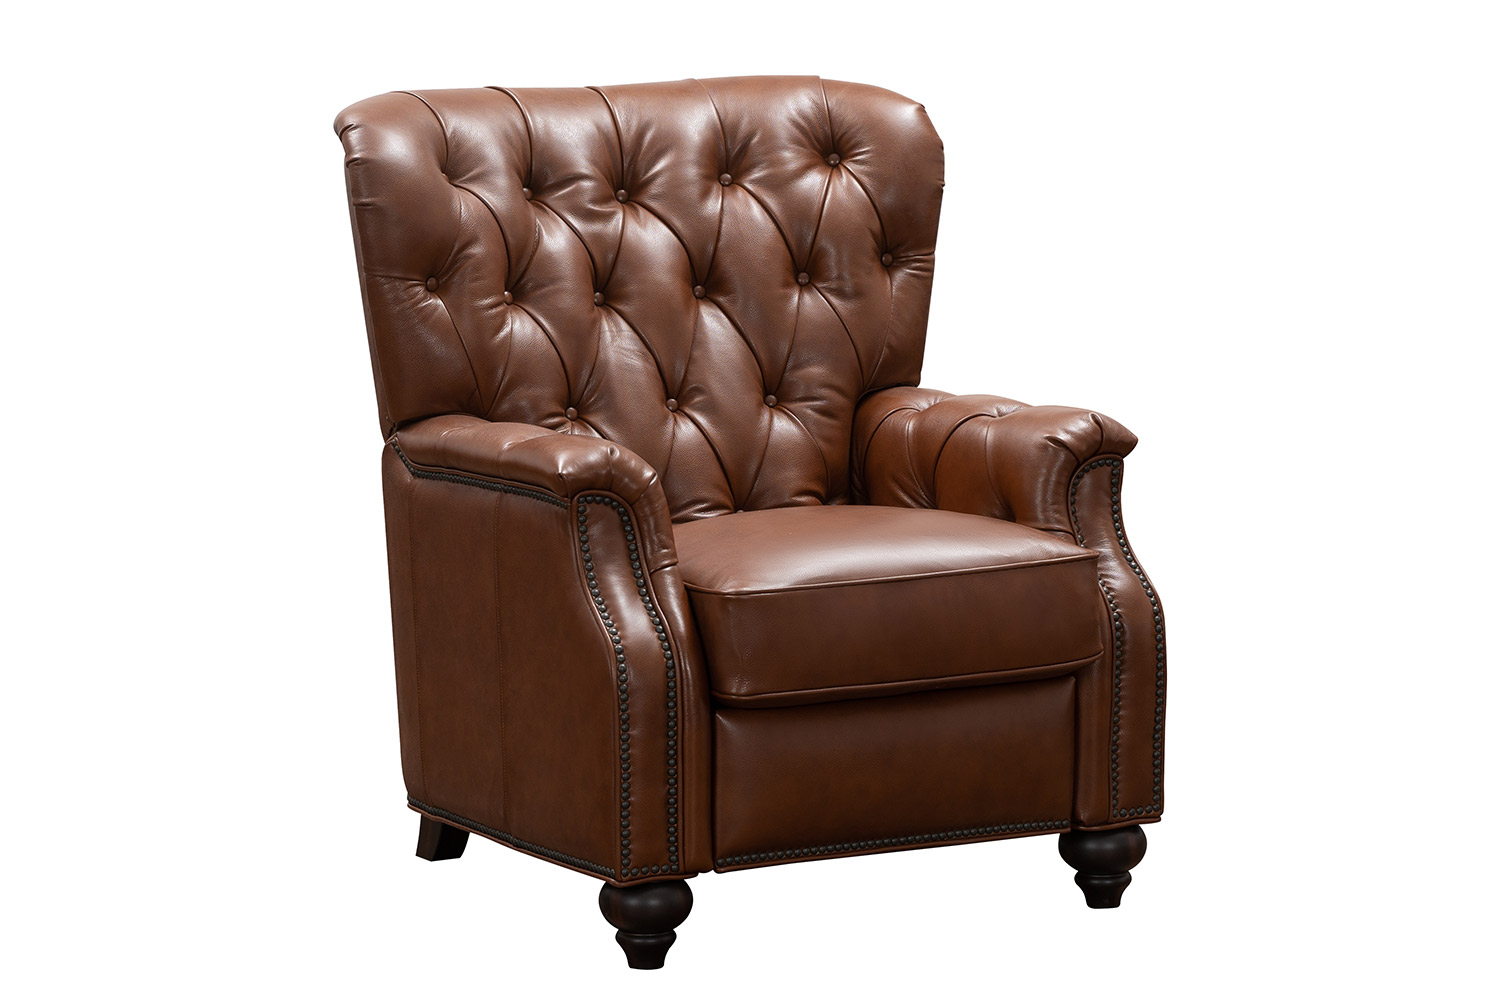 Barcalounger Lombard Recliner Chair - Ashford Bitters/All Leather